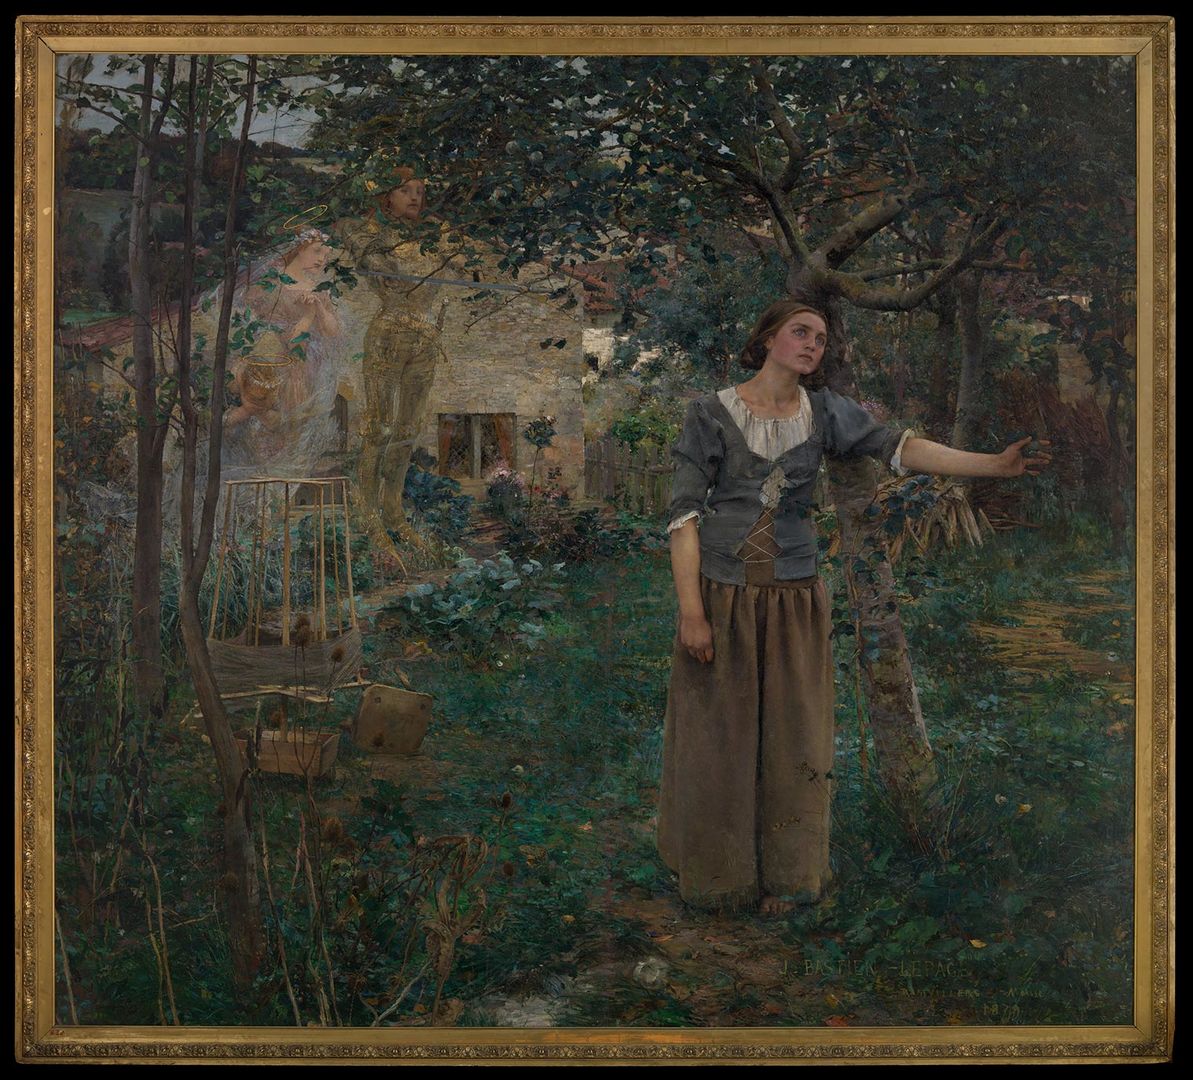 Jules Bastien-Lepage's Joan of Arc stands in the middle of a garden with her head titled as though she is listening to something in the distance.